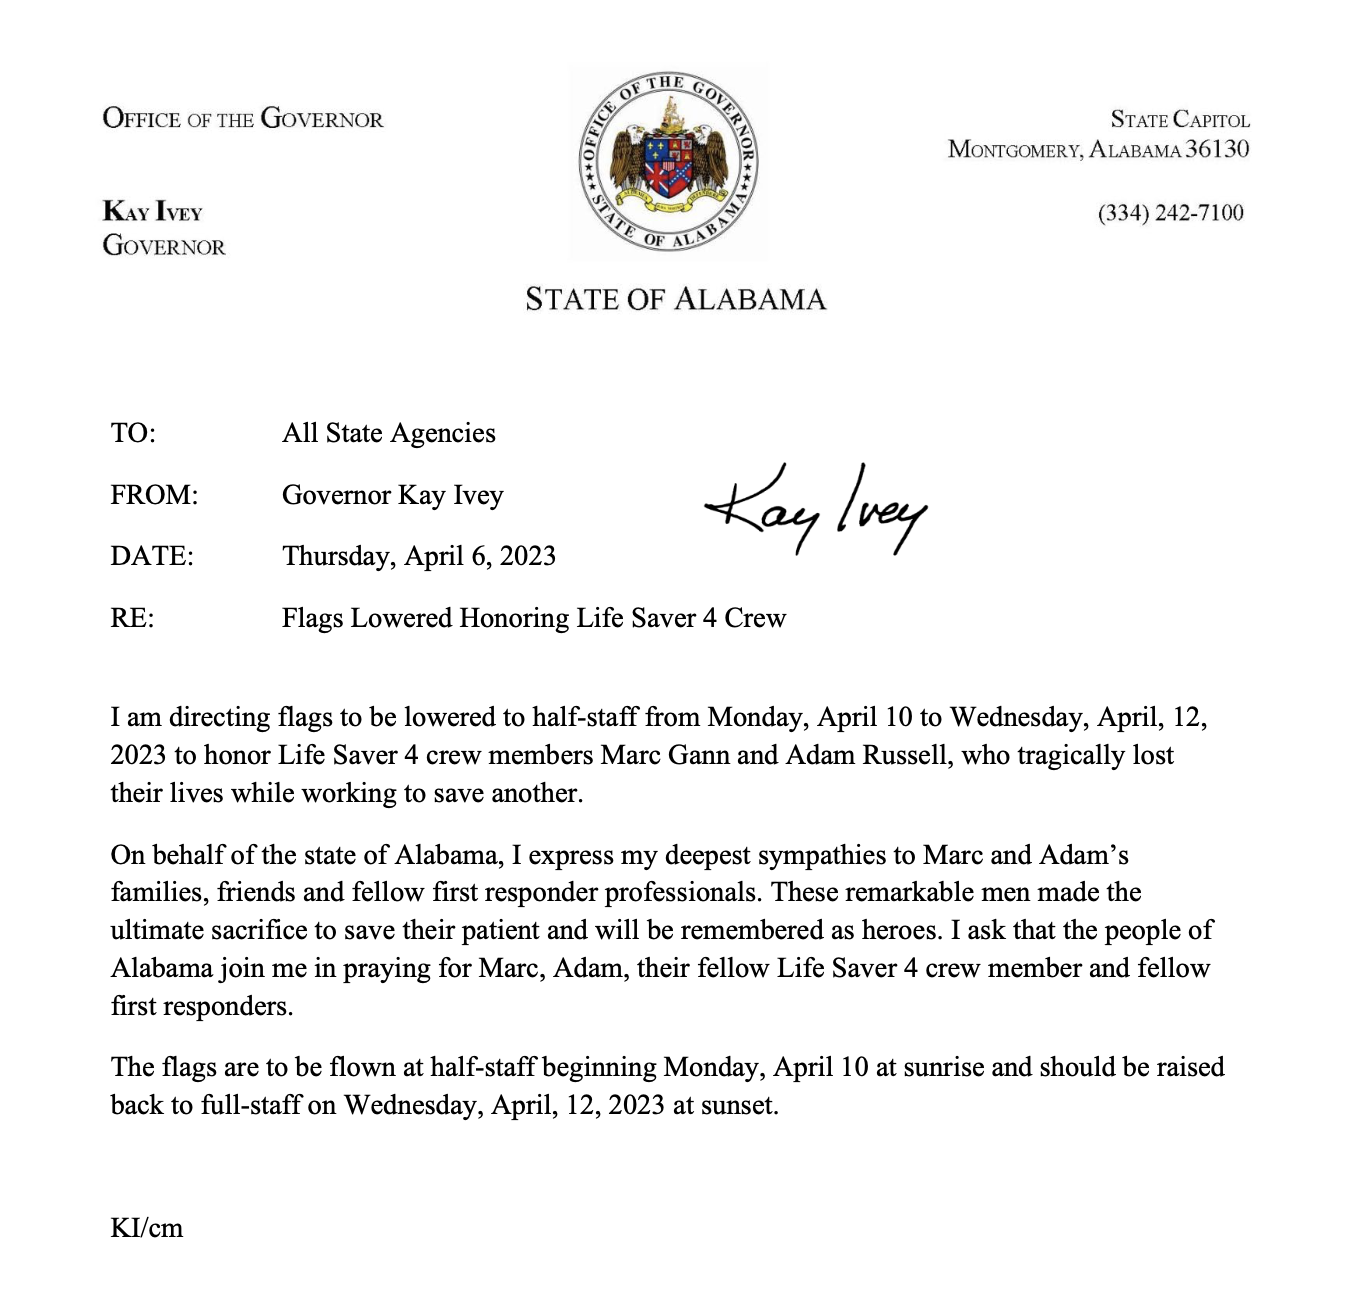 The flags are to be flown at half-staff beginning Monday, April 10 at sunrise and should be raised back to full-staff on Wednesday, April, 12, 2023 at sunset.